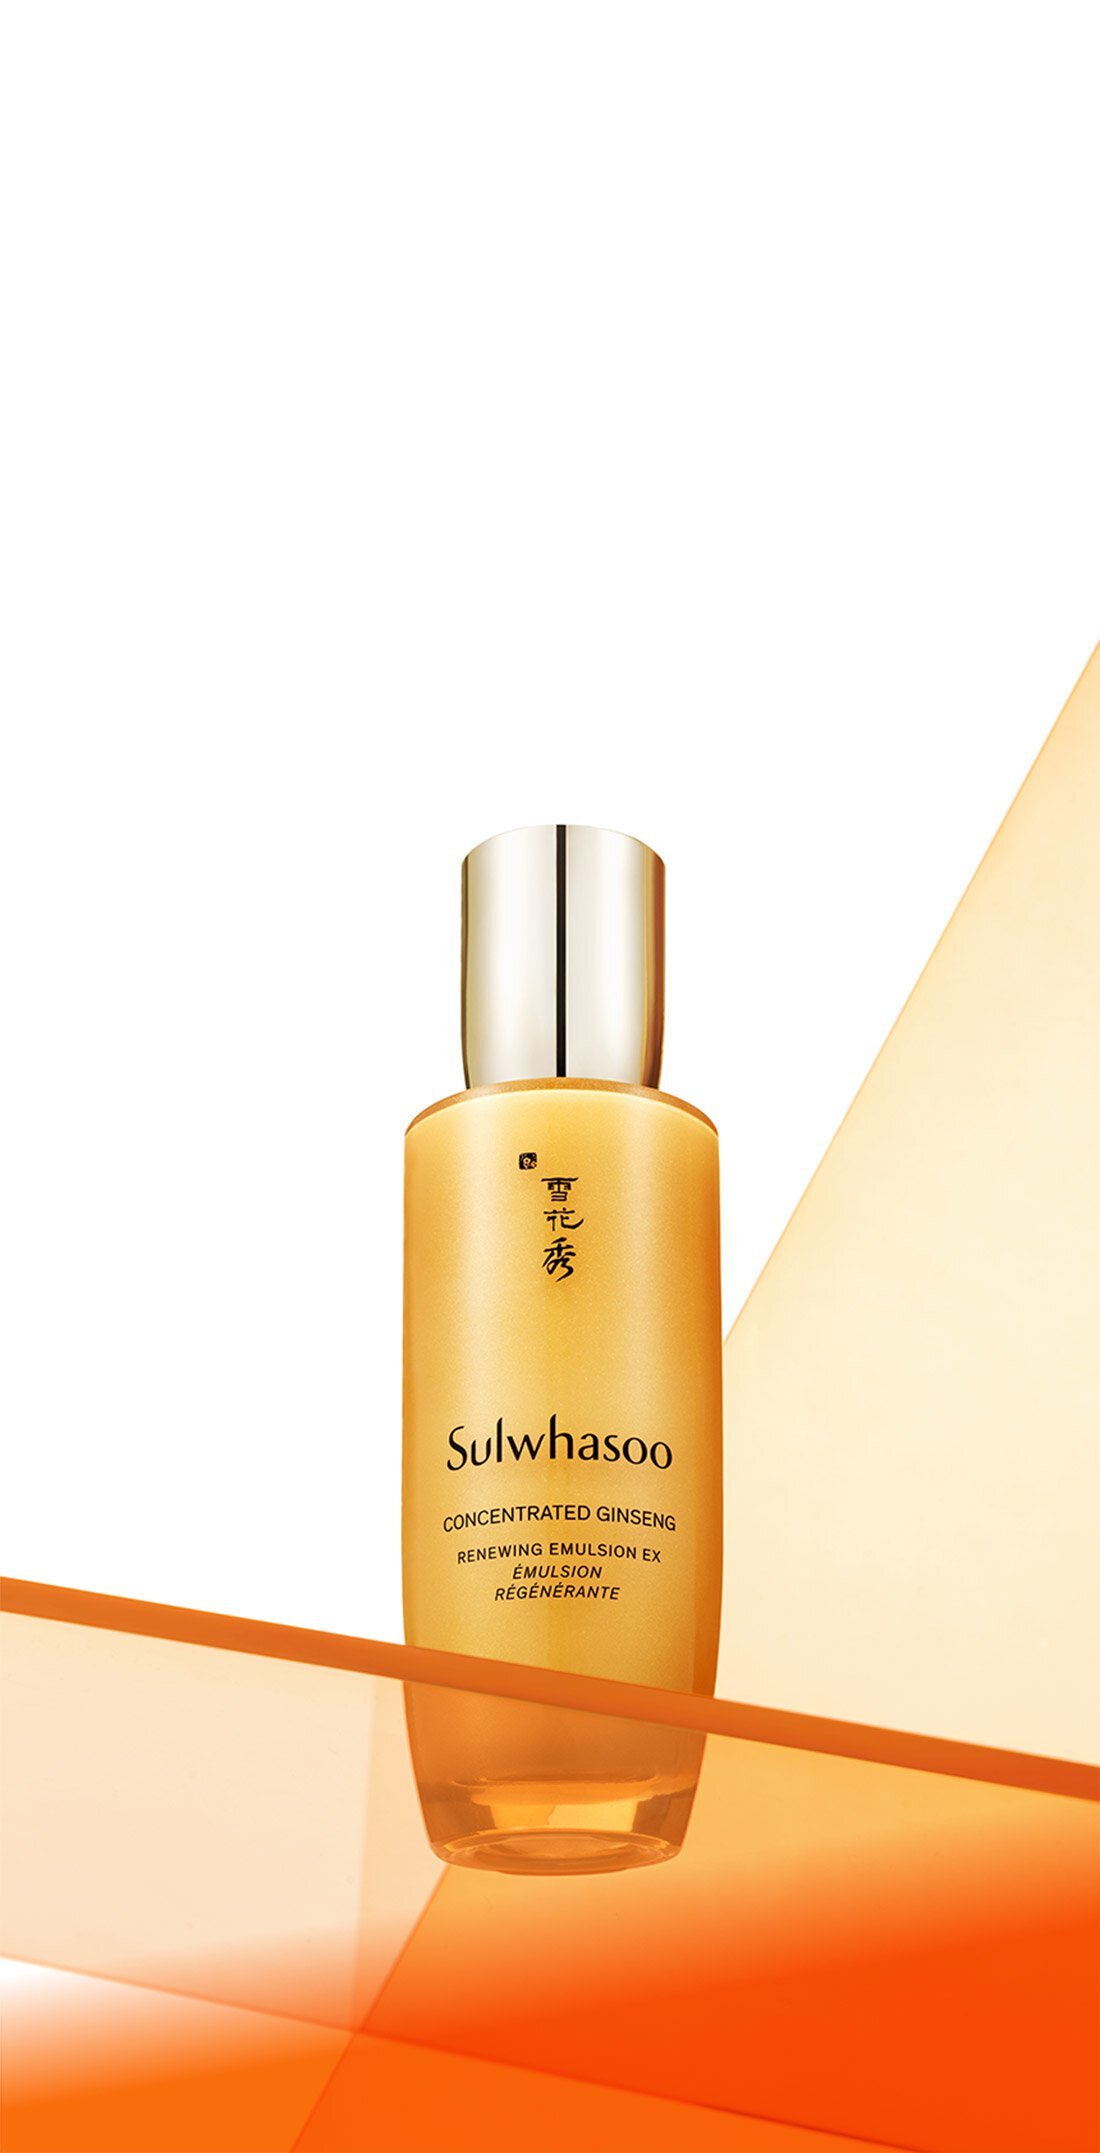 Concentrated Ginseng Renewing Emulsion EX